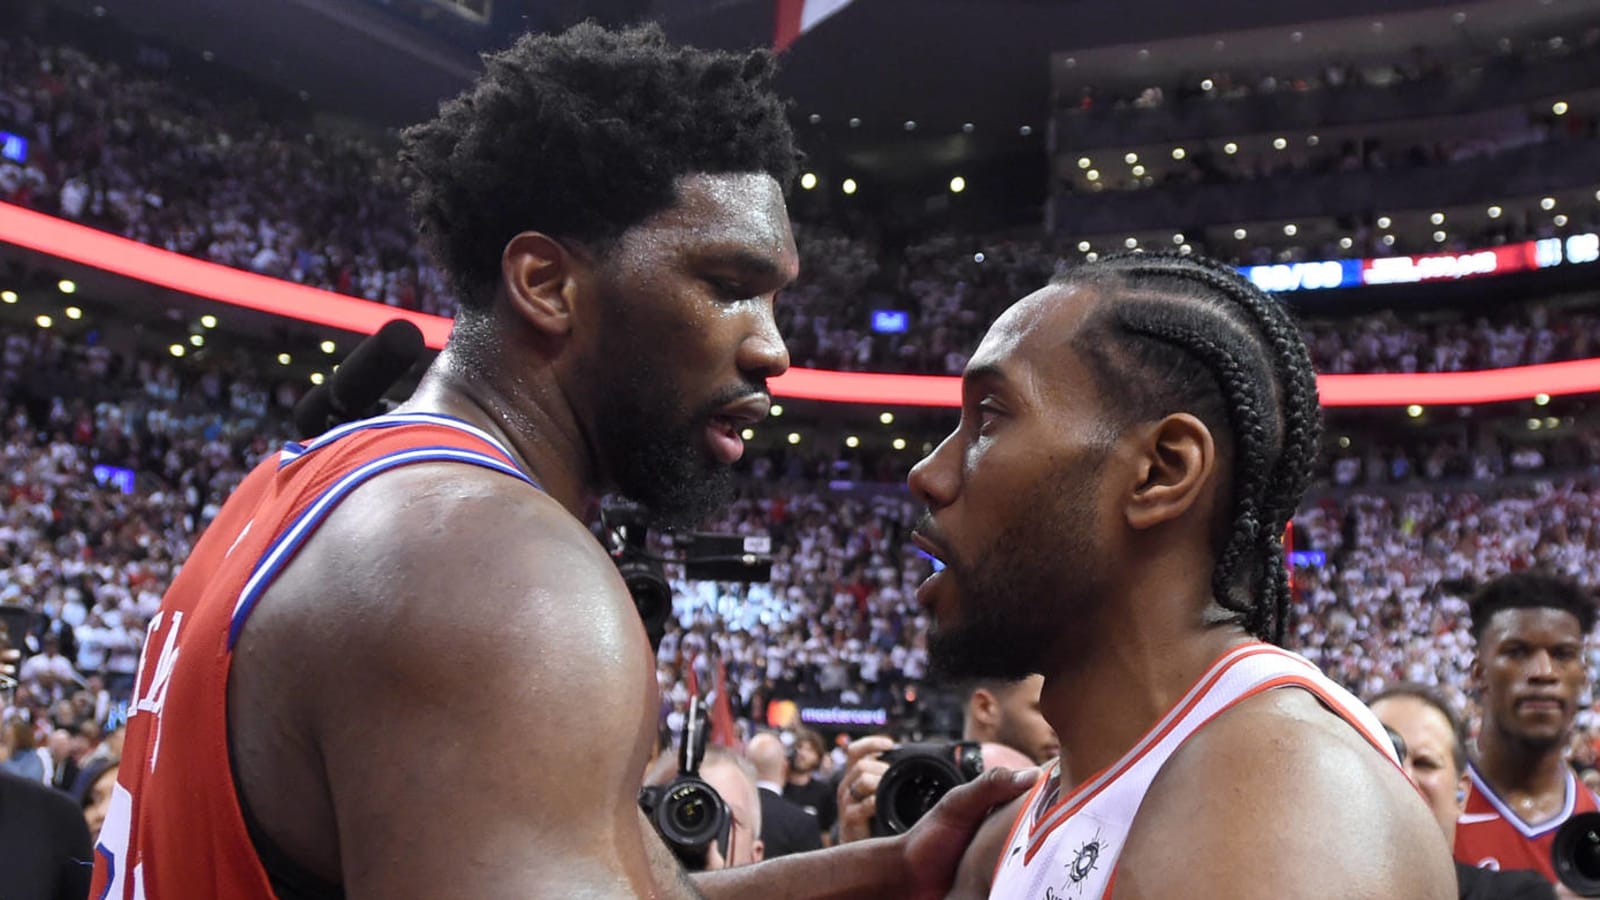 Devastated Joel Embiid was crying after 76ers lost in Game 7